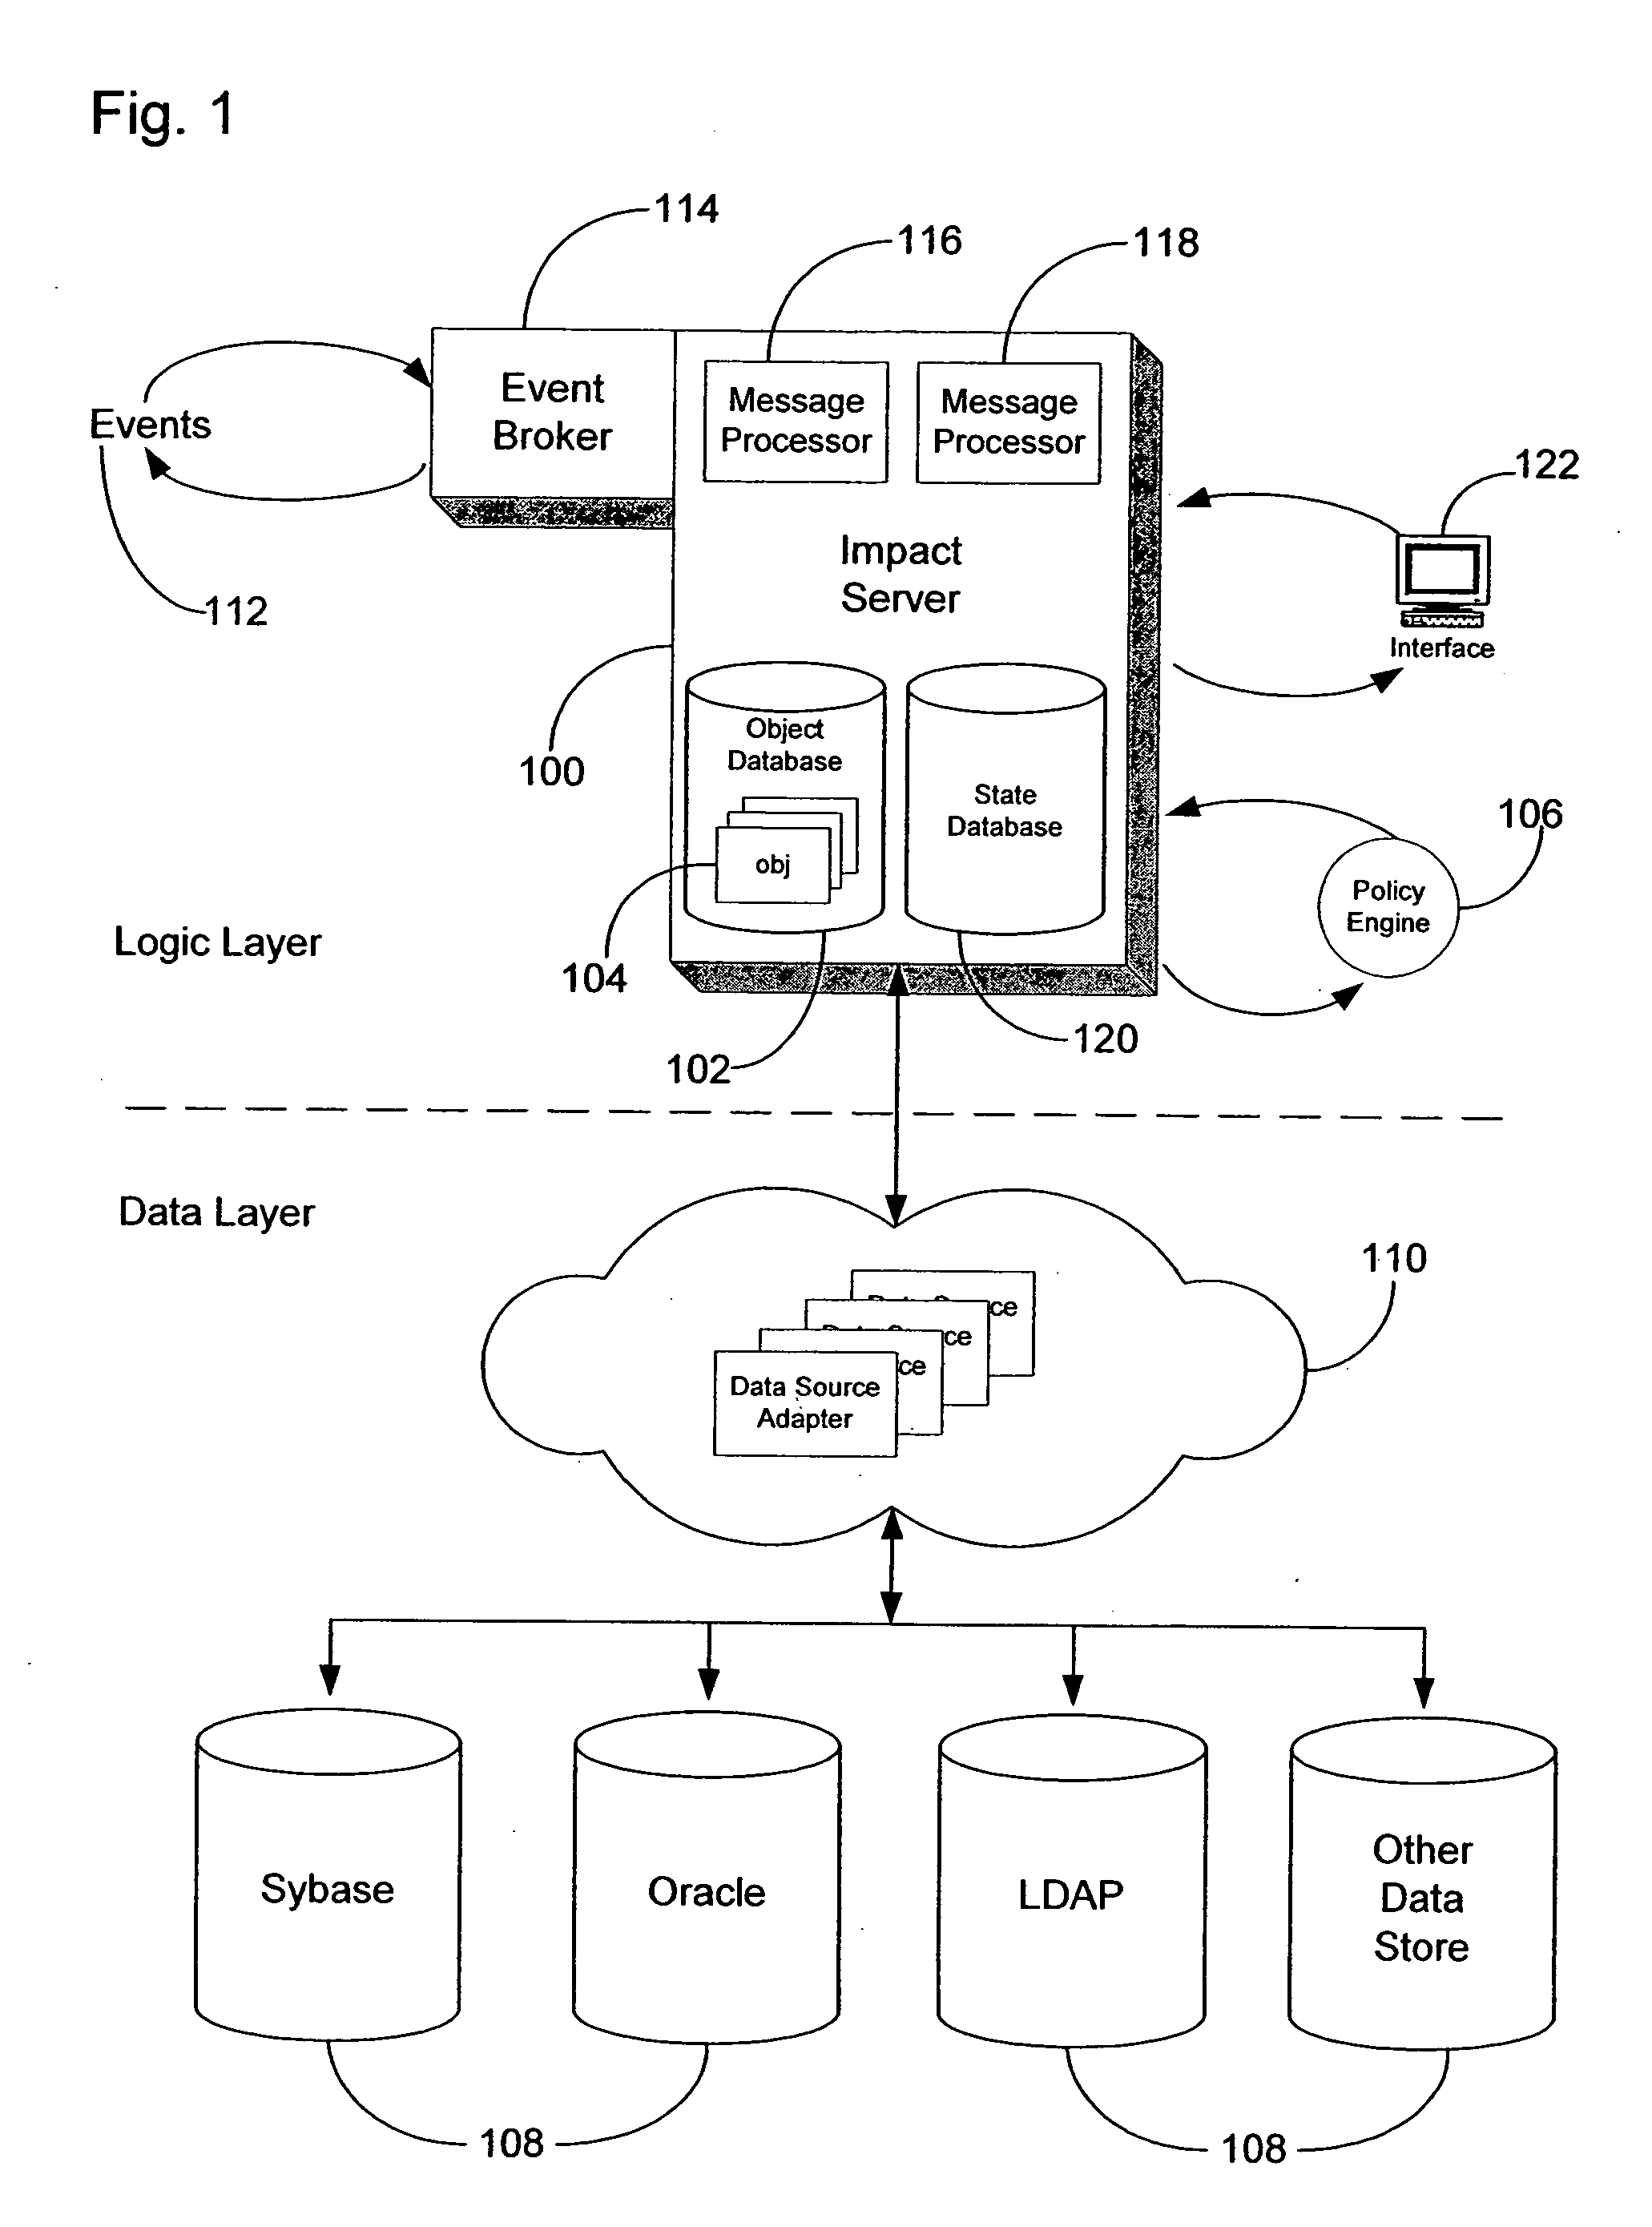 Method and system for event impact analysis